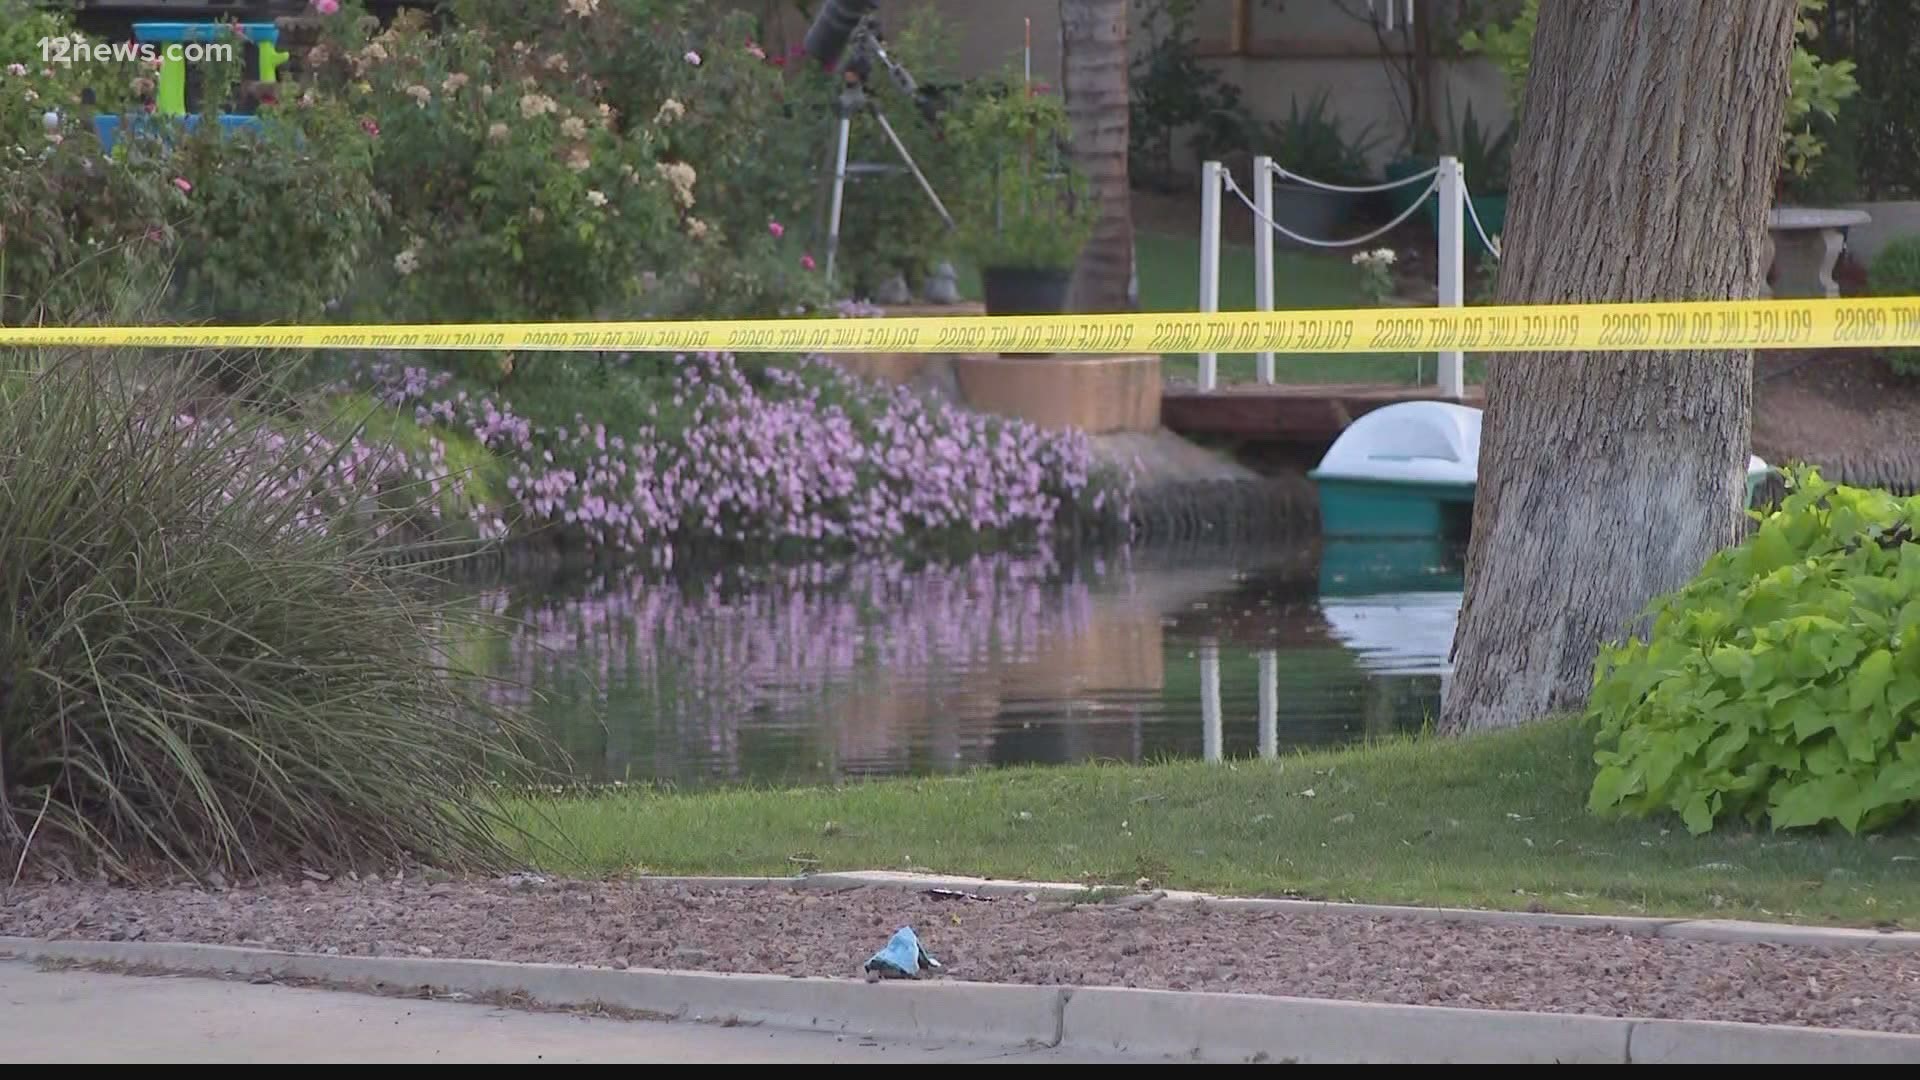 A 2-year-old girl died Tuesday night after wandering from home and being discovered unconscious in a Chandler lake, according to police.